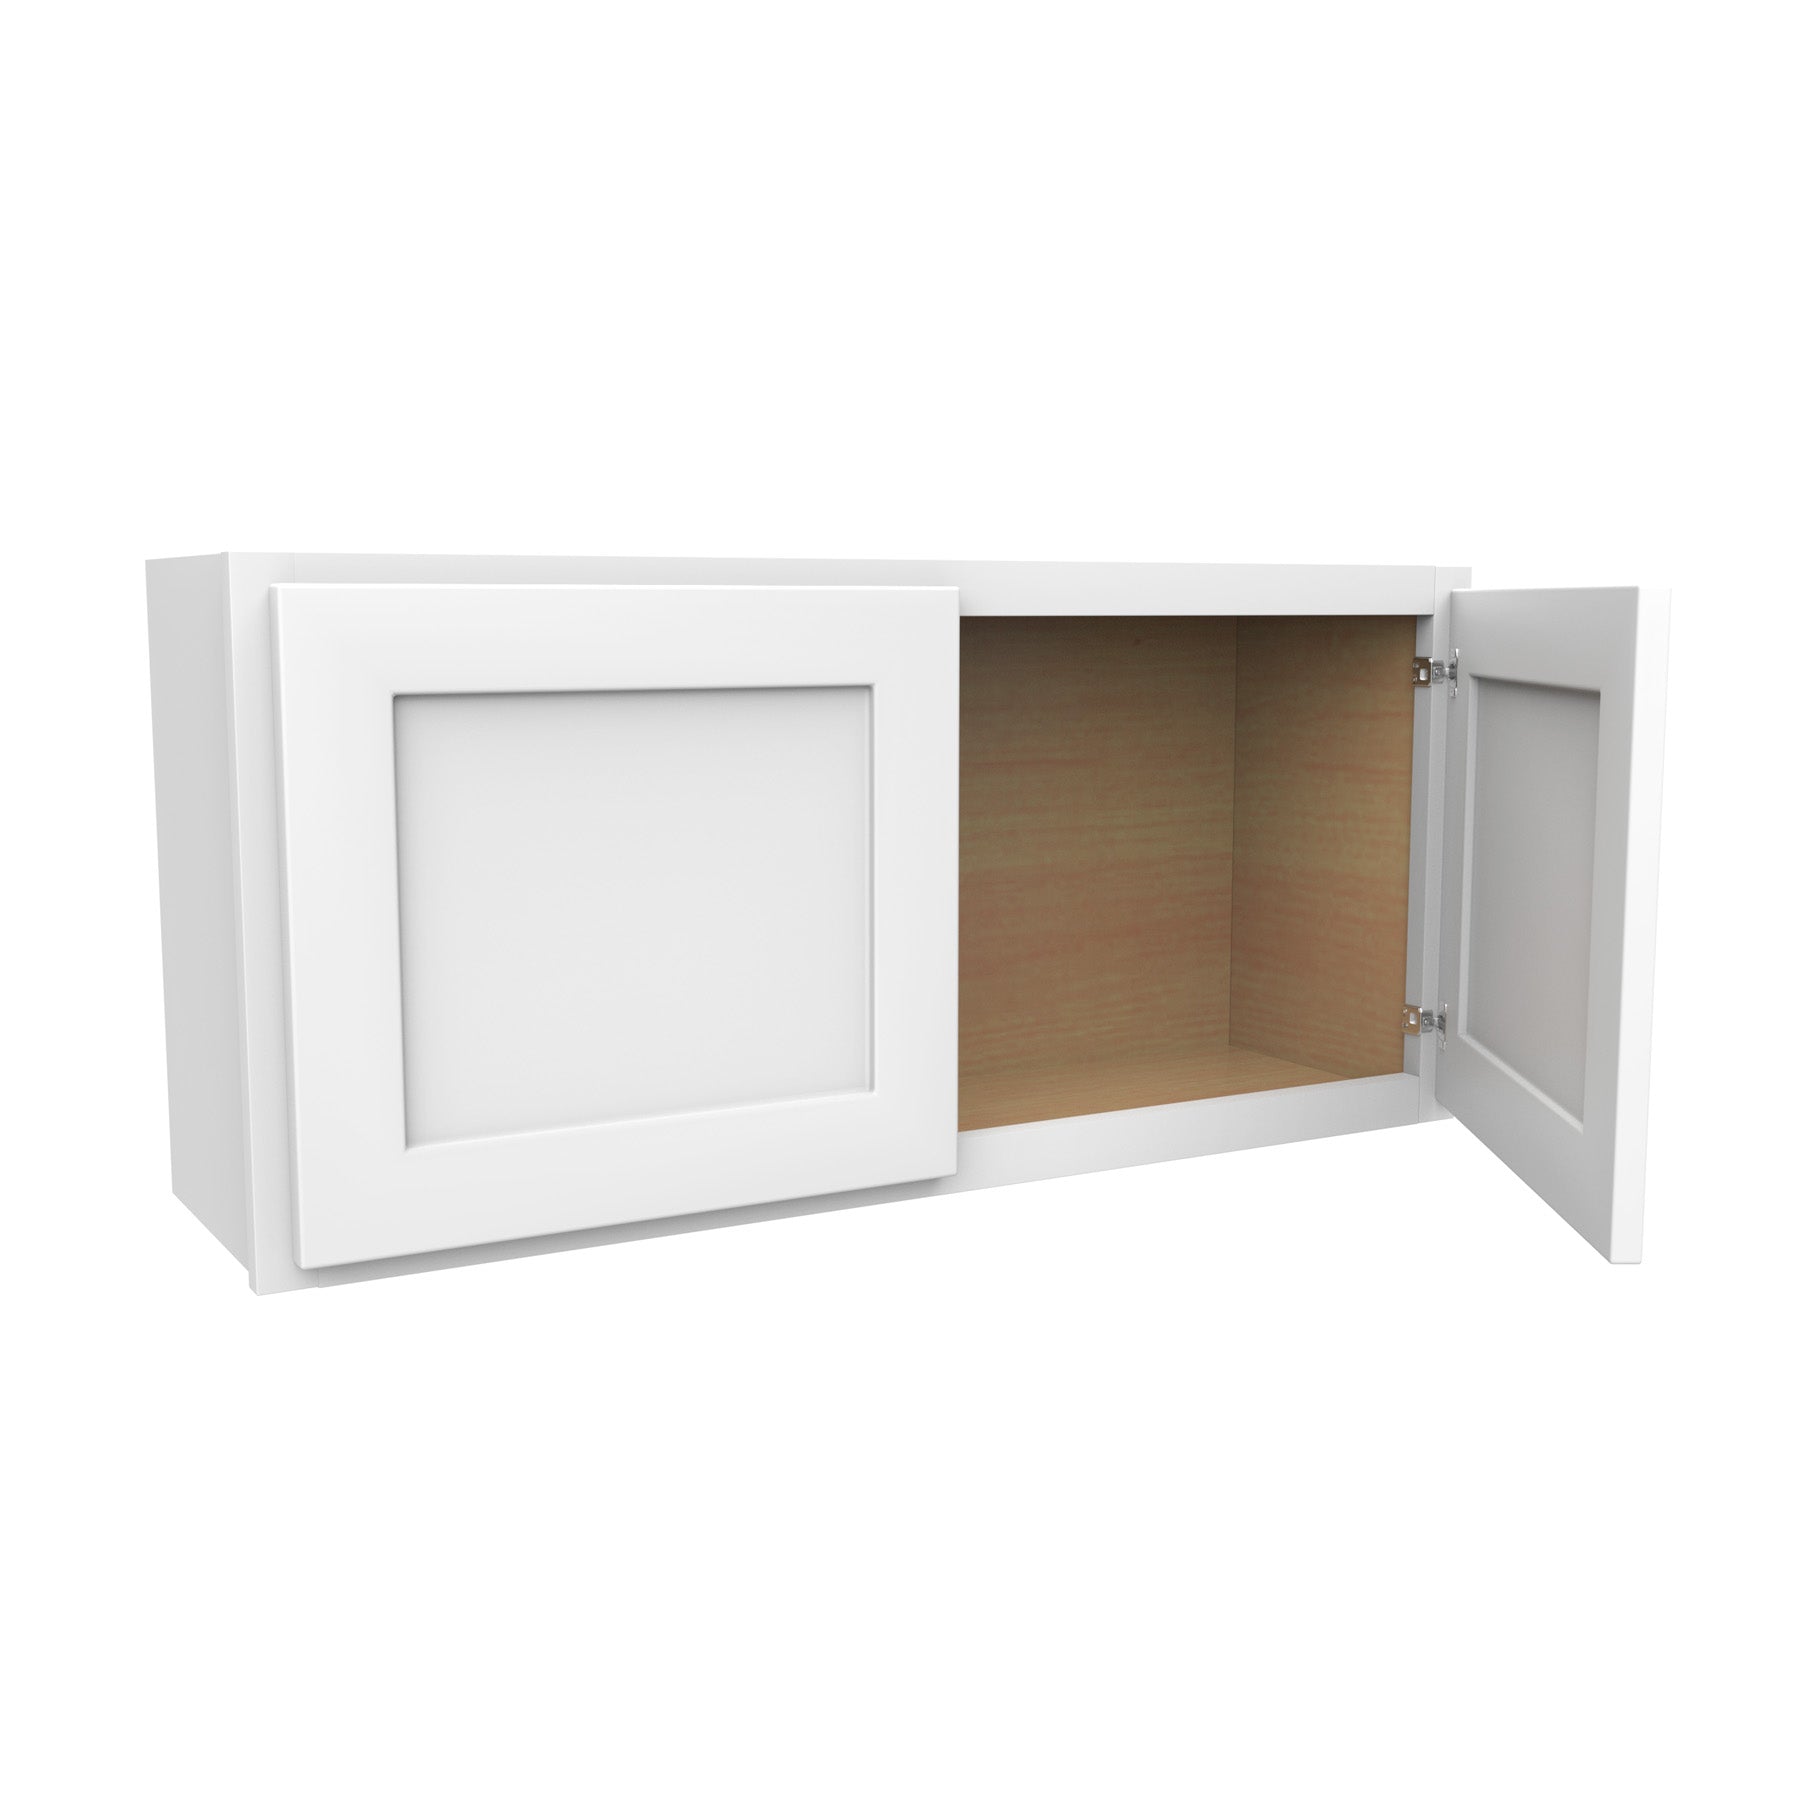 18 Inch High Double Door Wall Cabinet - Luxor White Shaker - Ready To Assemble, 39"W x 18"H x 12"D